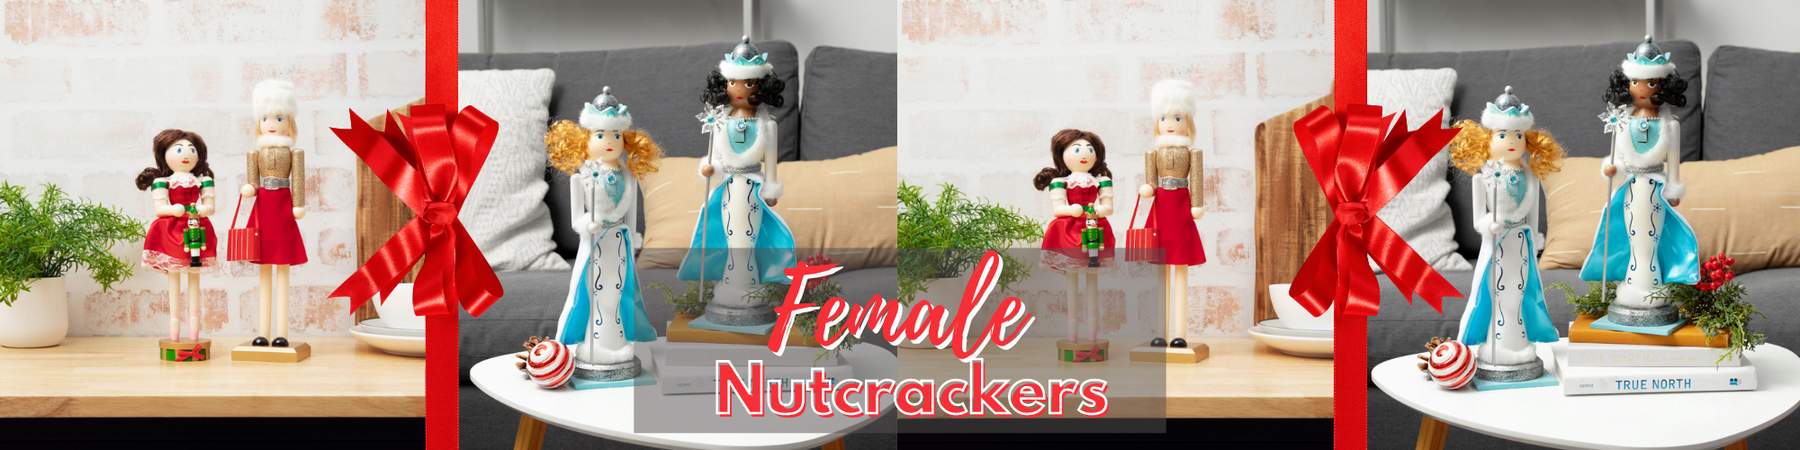 Female Collection of Nutcrackers